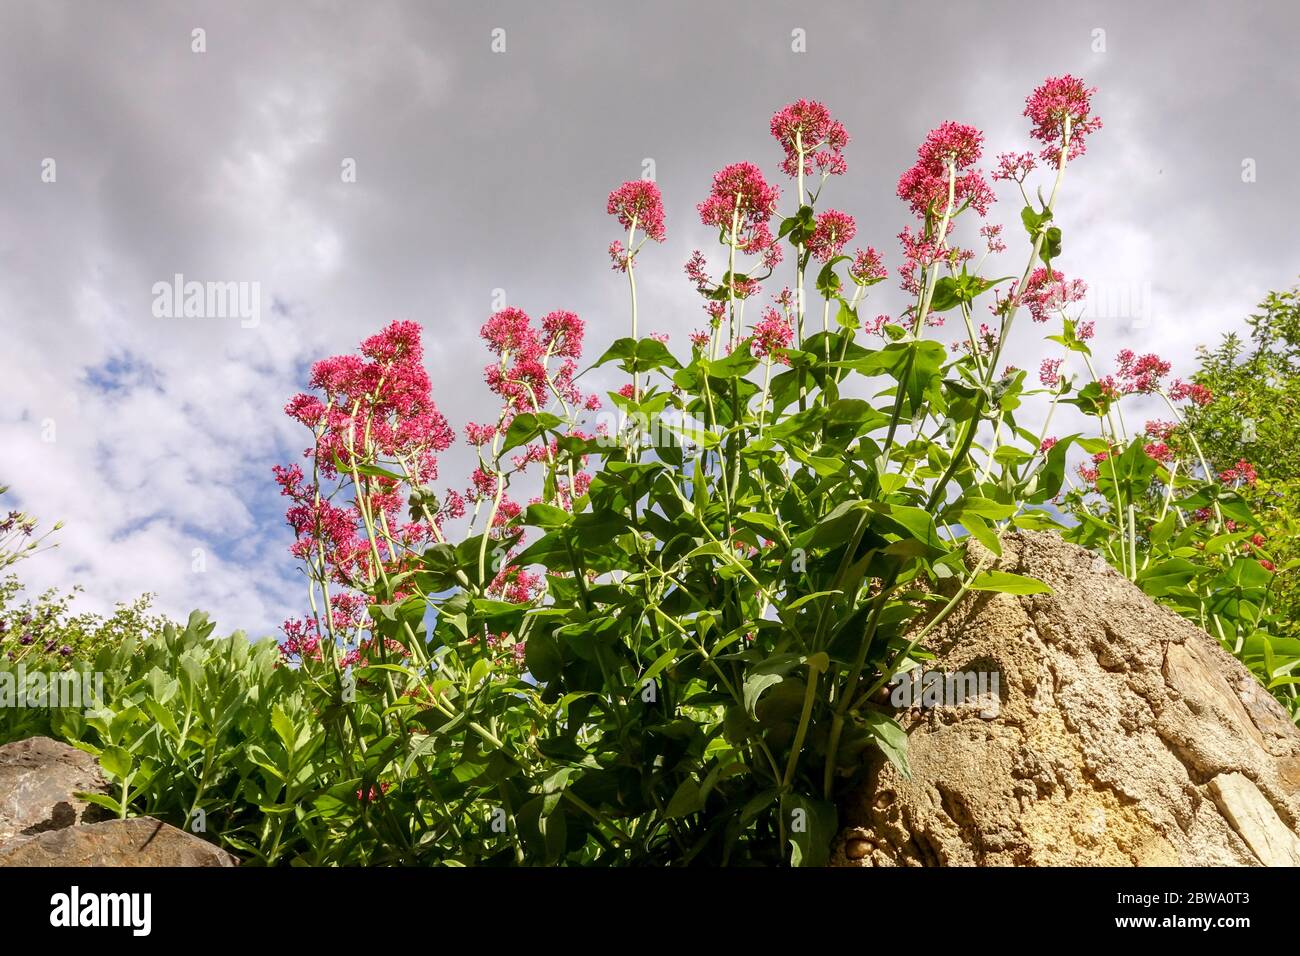 Red valerian Centranthus ruber grows on rock Stock Photo